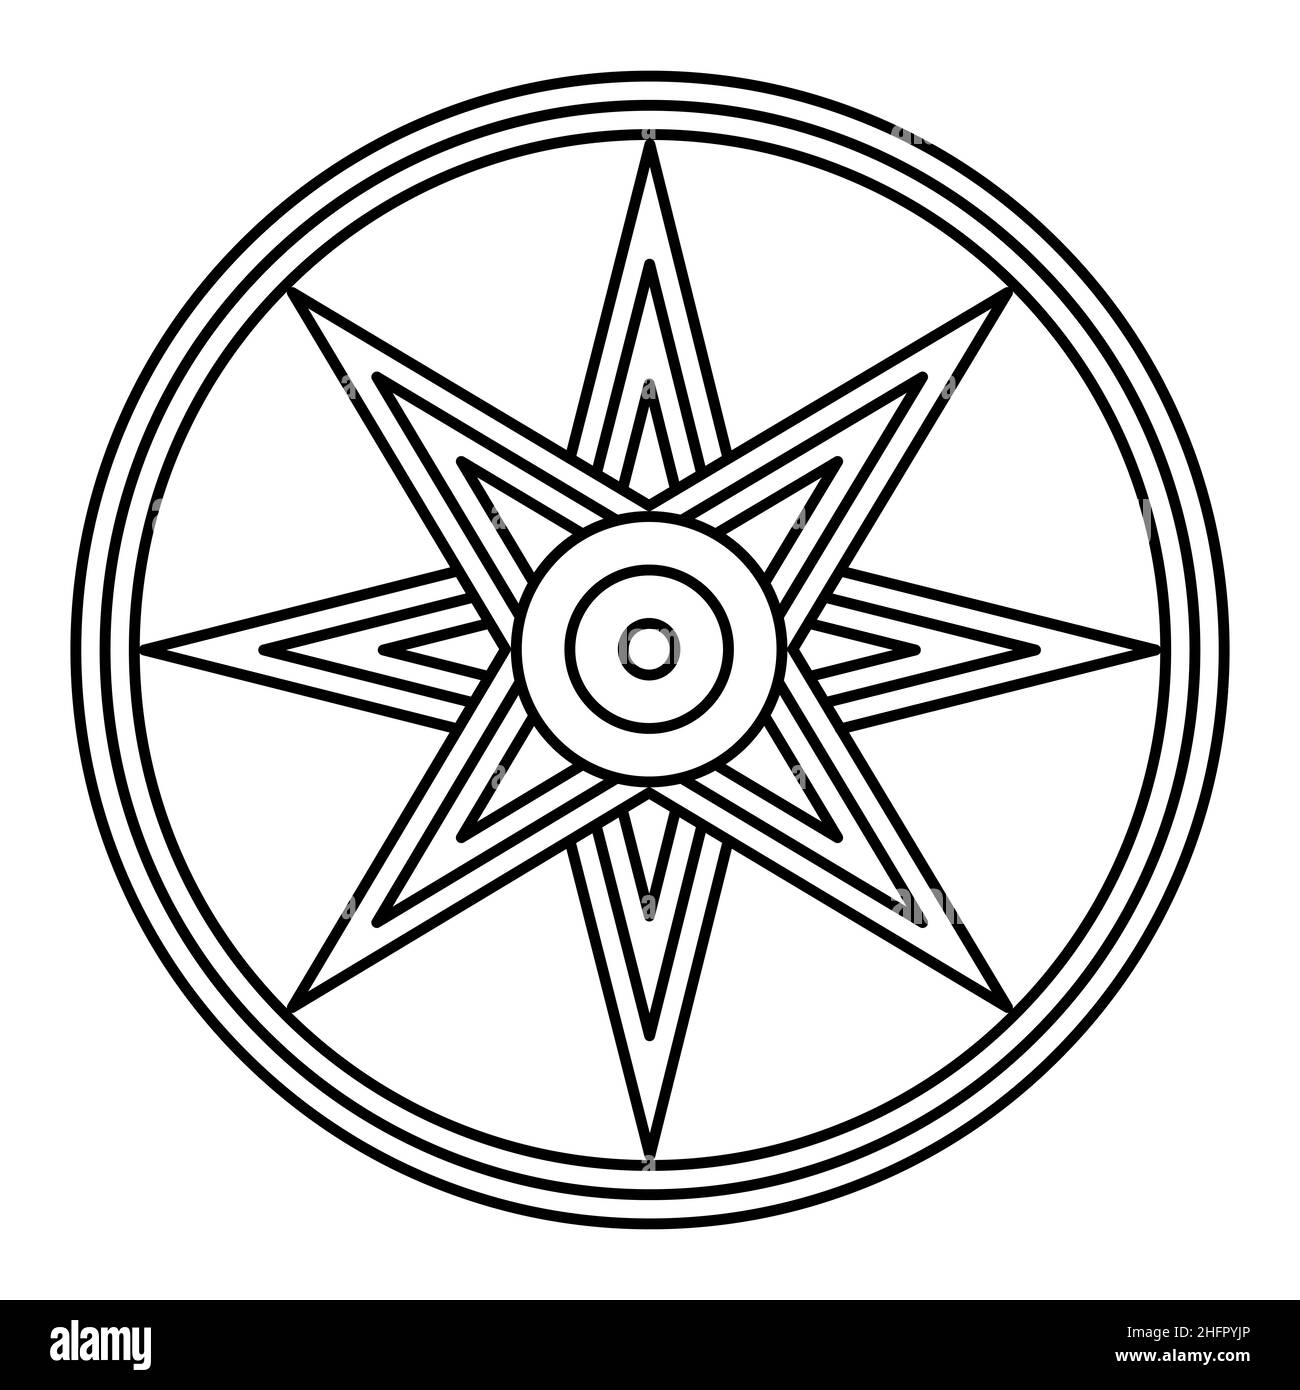 Symbol of the Star of Ishtar or Inanna, also known as Star of Venus. Usually depicted with eight points, symbol of ancient Sumerian goddess Inanna. Stock Photo